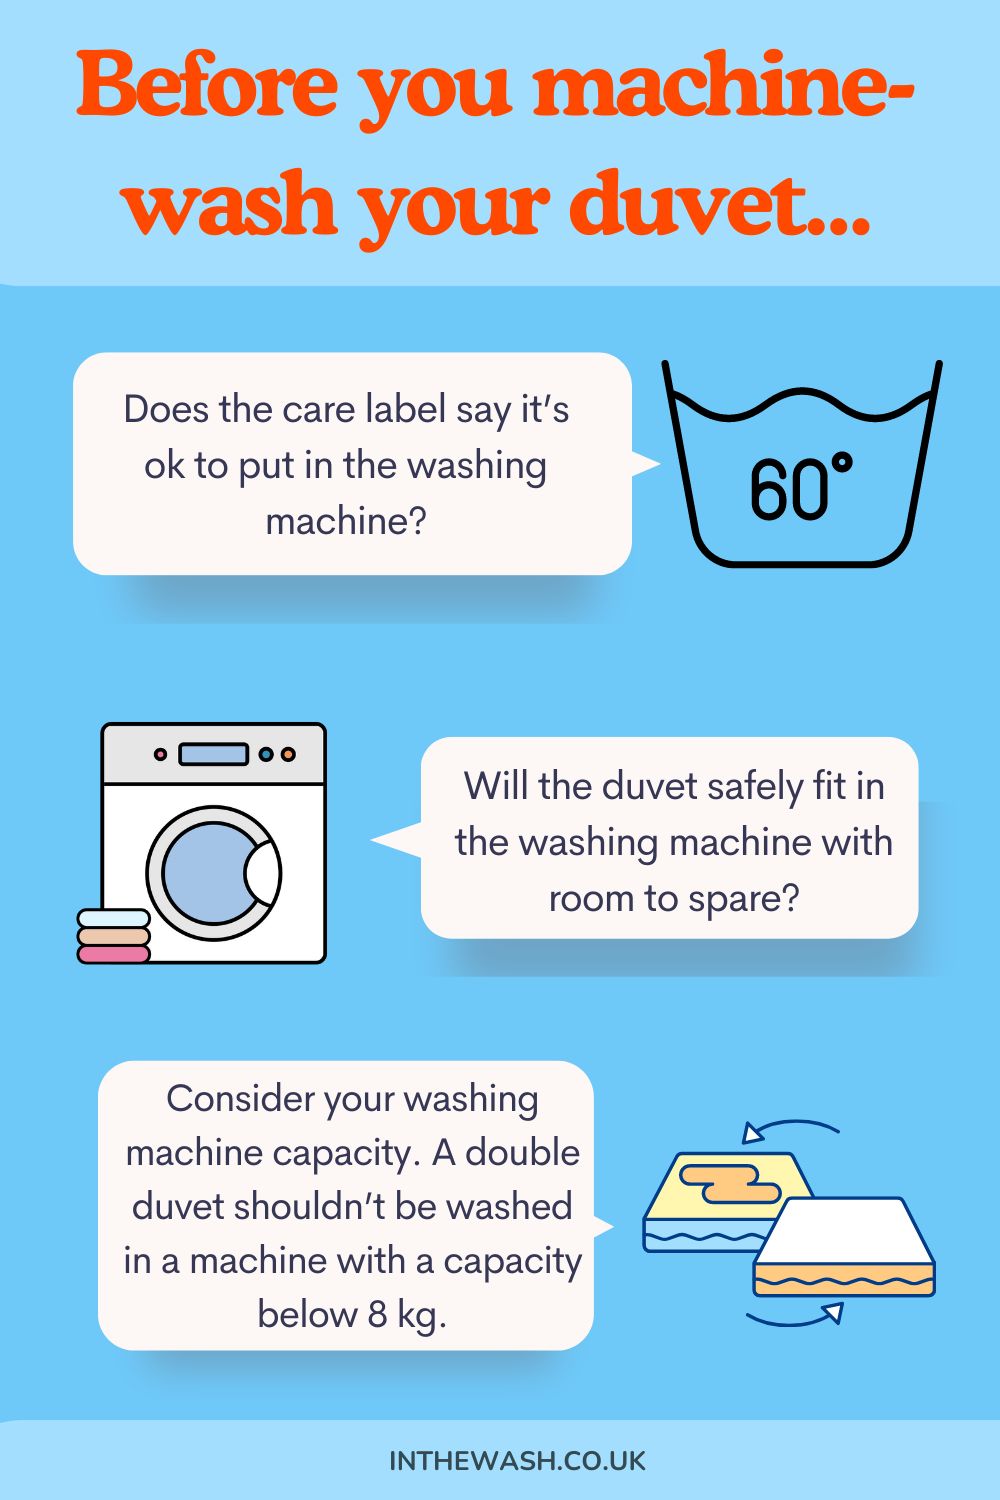 Things to consider before machine-washing a duvet